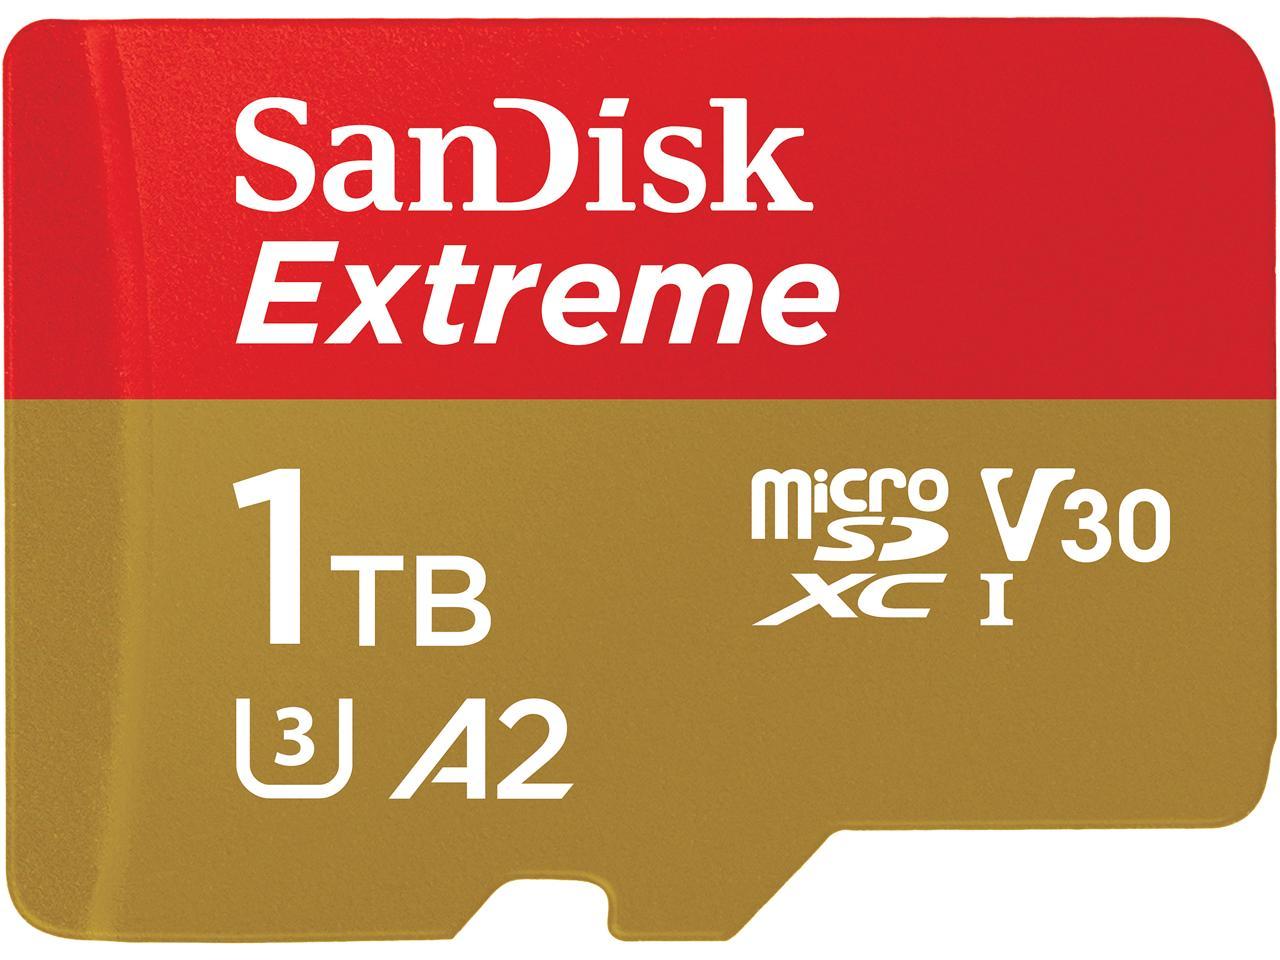 Sandisk 1tb Extreme Microsdxc Uhs I U3 Memory Card With Adapter Speed Up To 160mb S Sdsqxa1 1t00 Gn6ma Newegg Com